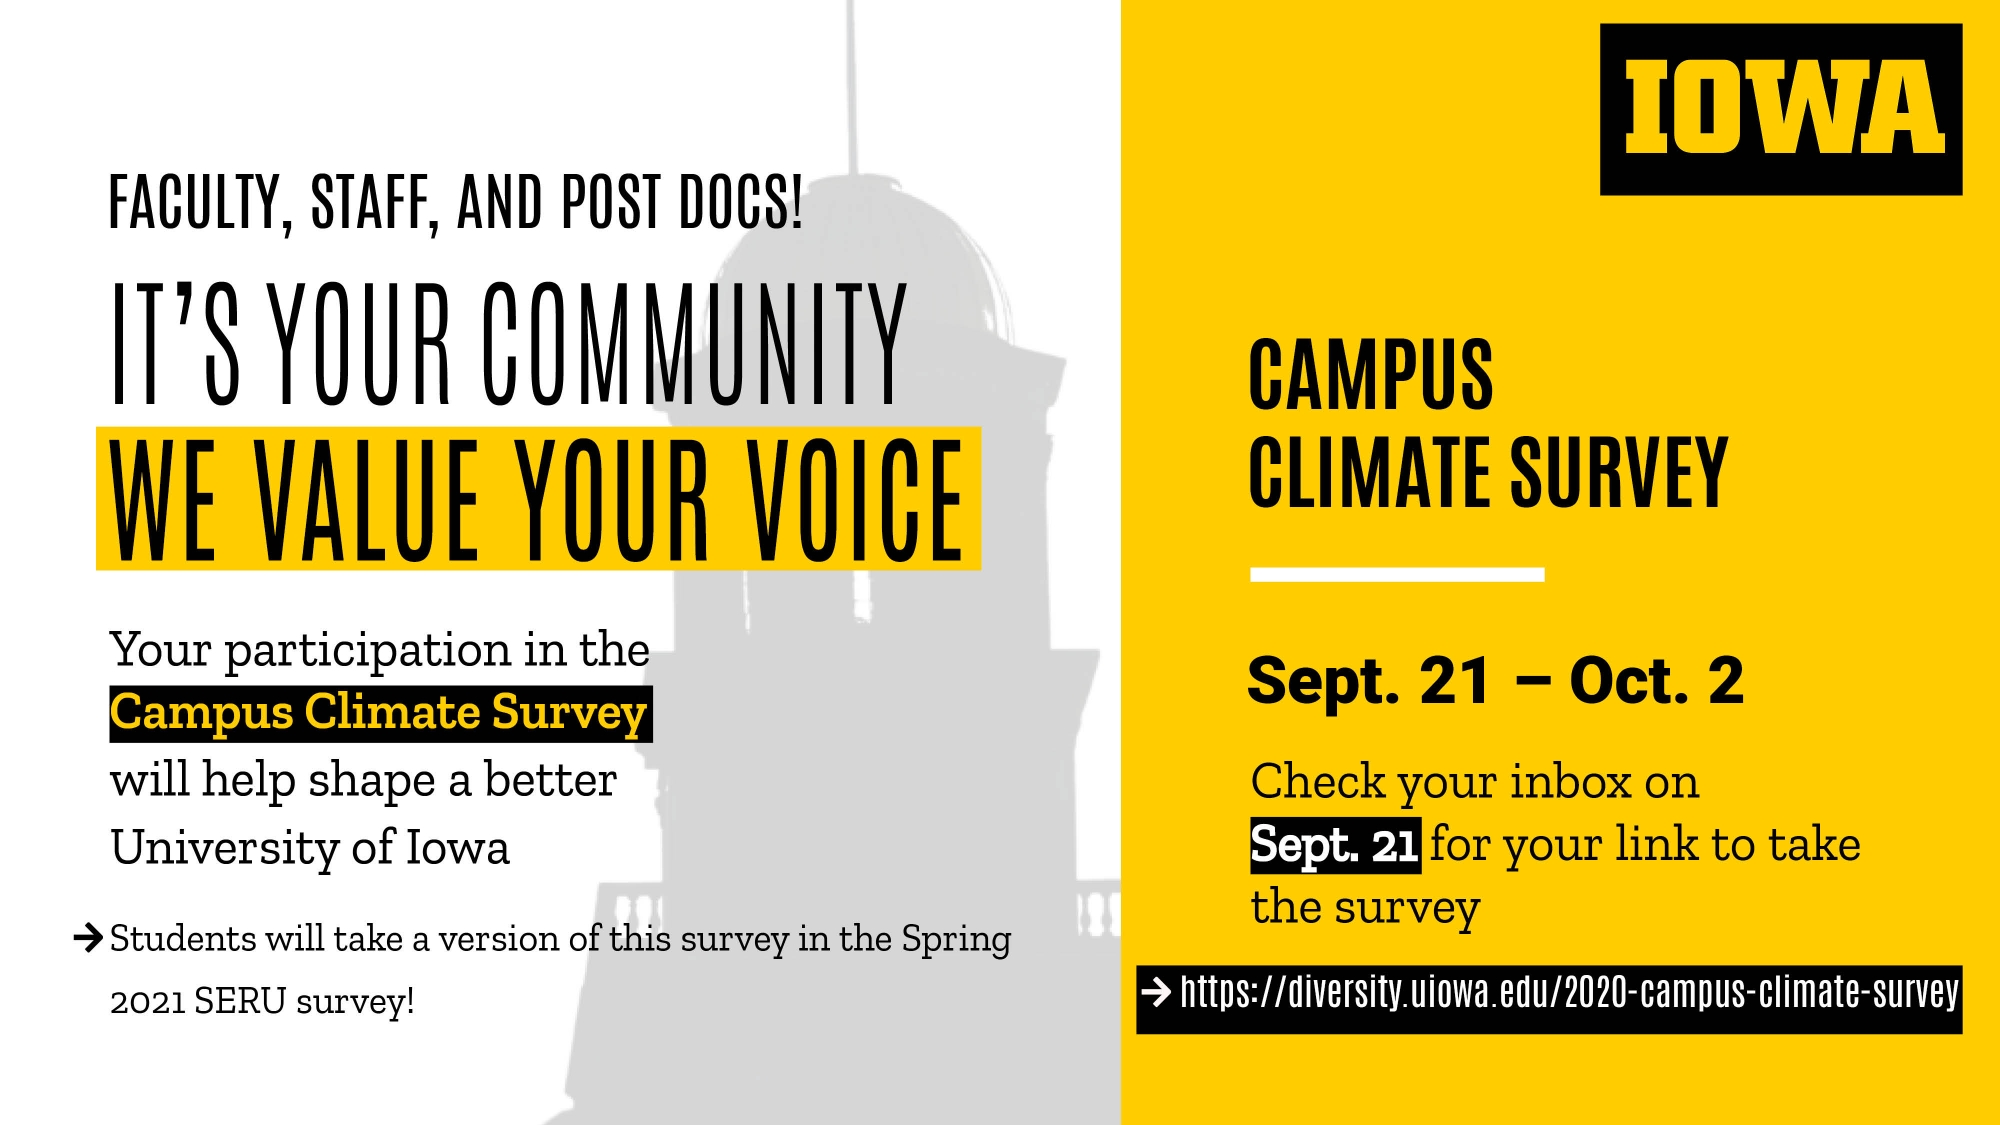 Campus Climate Survey - Open September 21 to October 2